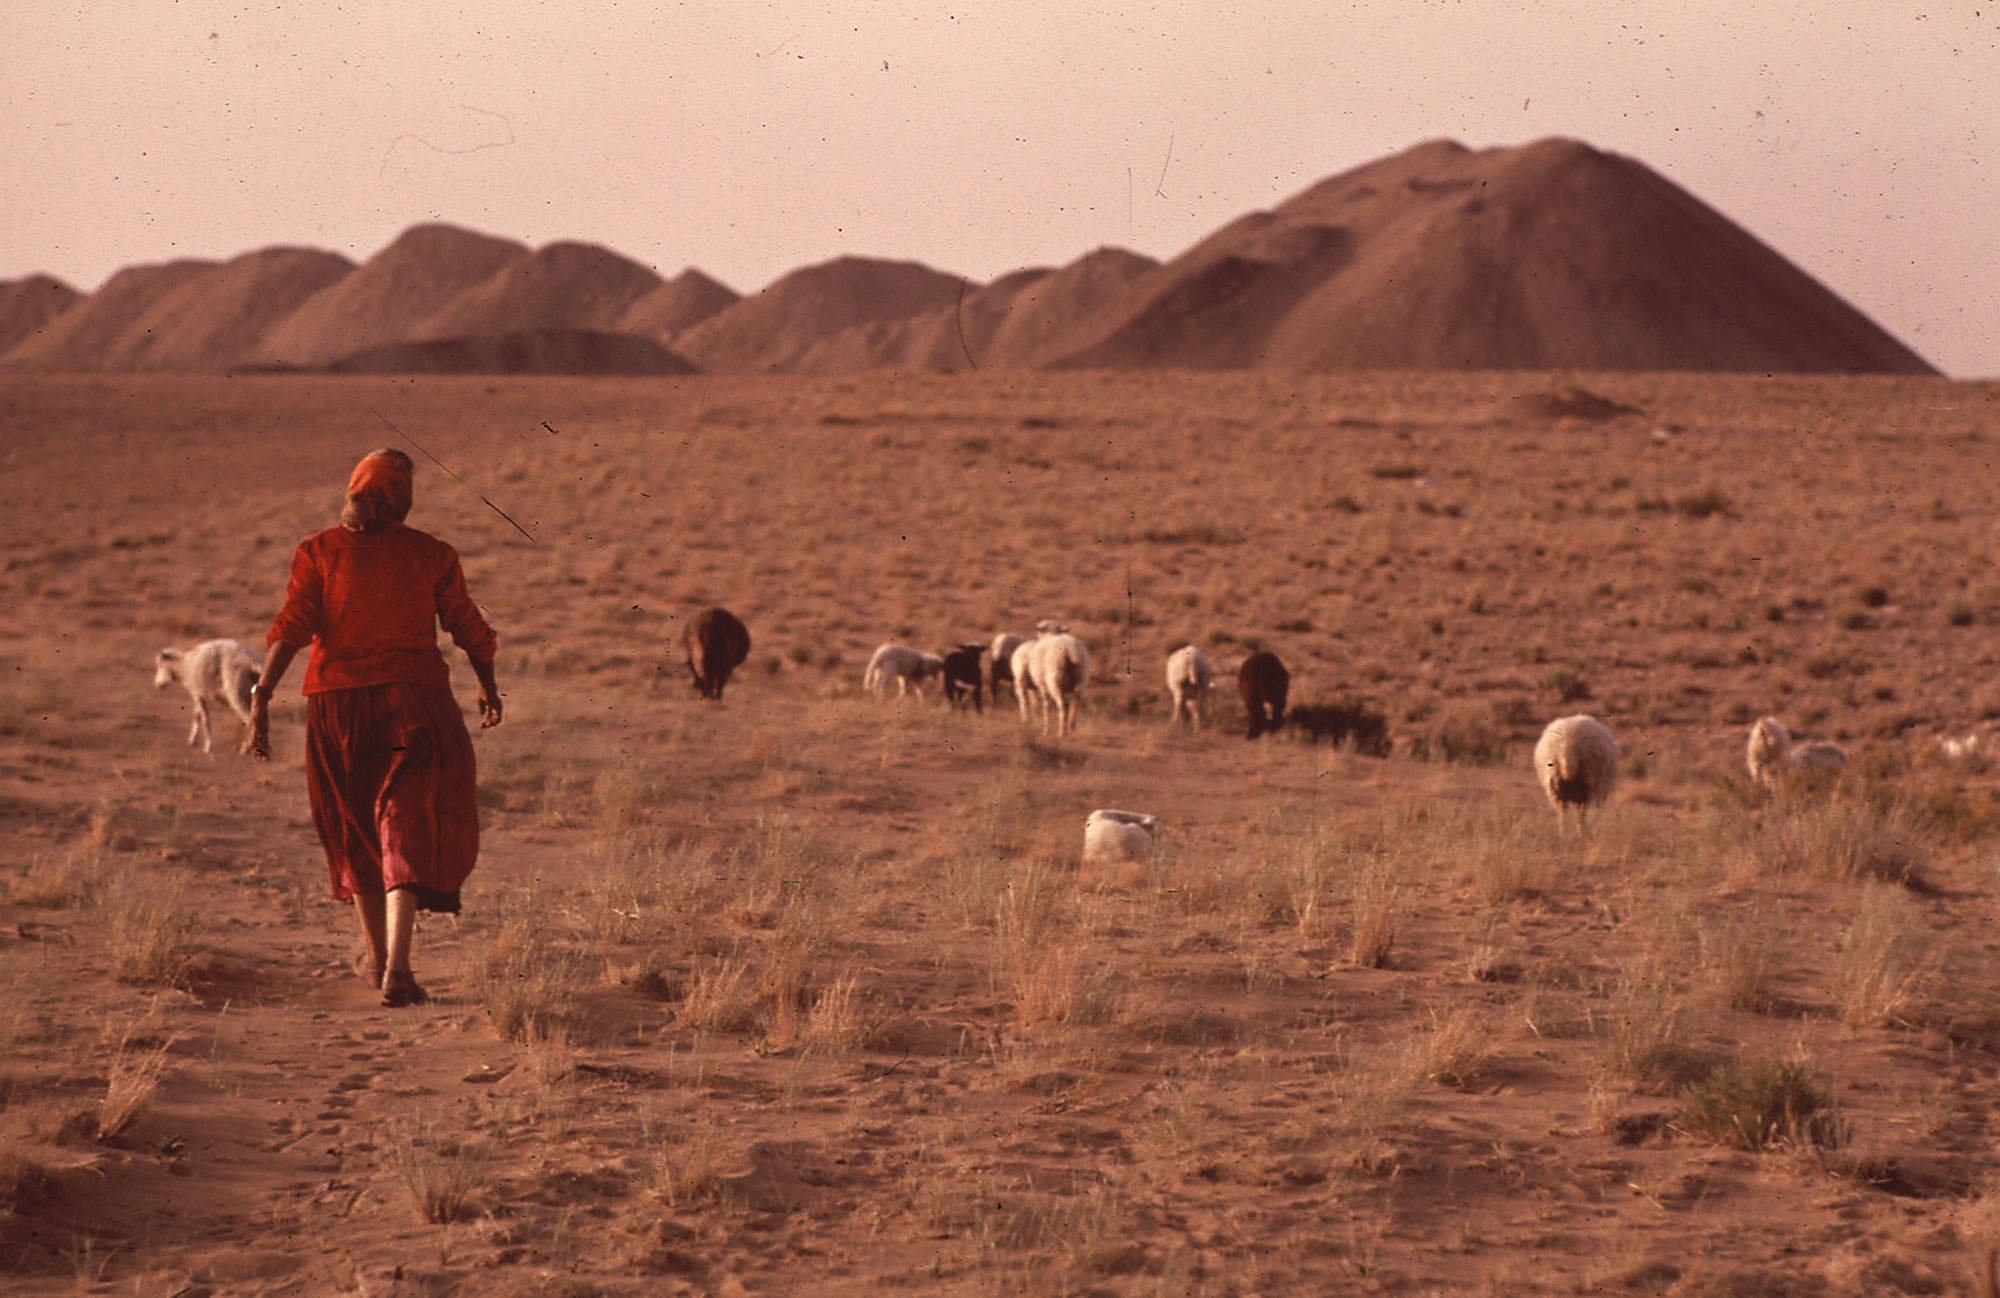 Photo of a women herding sheep near a coal mine in New Mexico. In the foreground, a woman with wearing a red shirt and calf-length skirt is walking away from the viewer. In front of her is a small herd of sheep in a landscape with scattered tufts of grass. In the background are large mounds of coal.